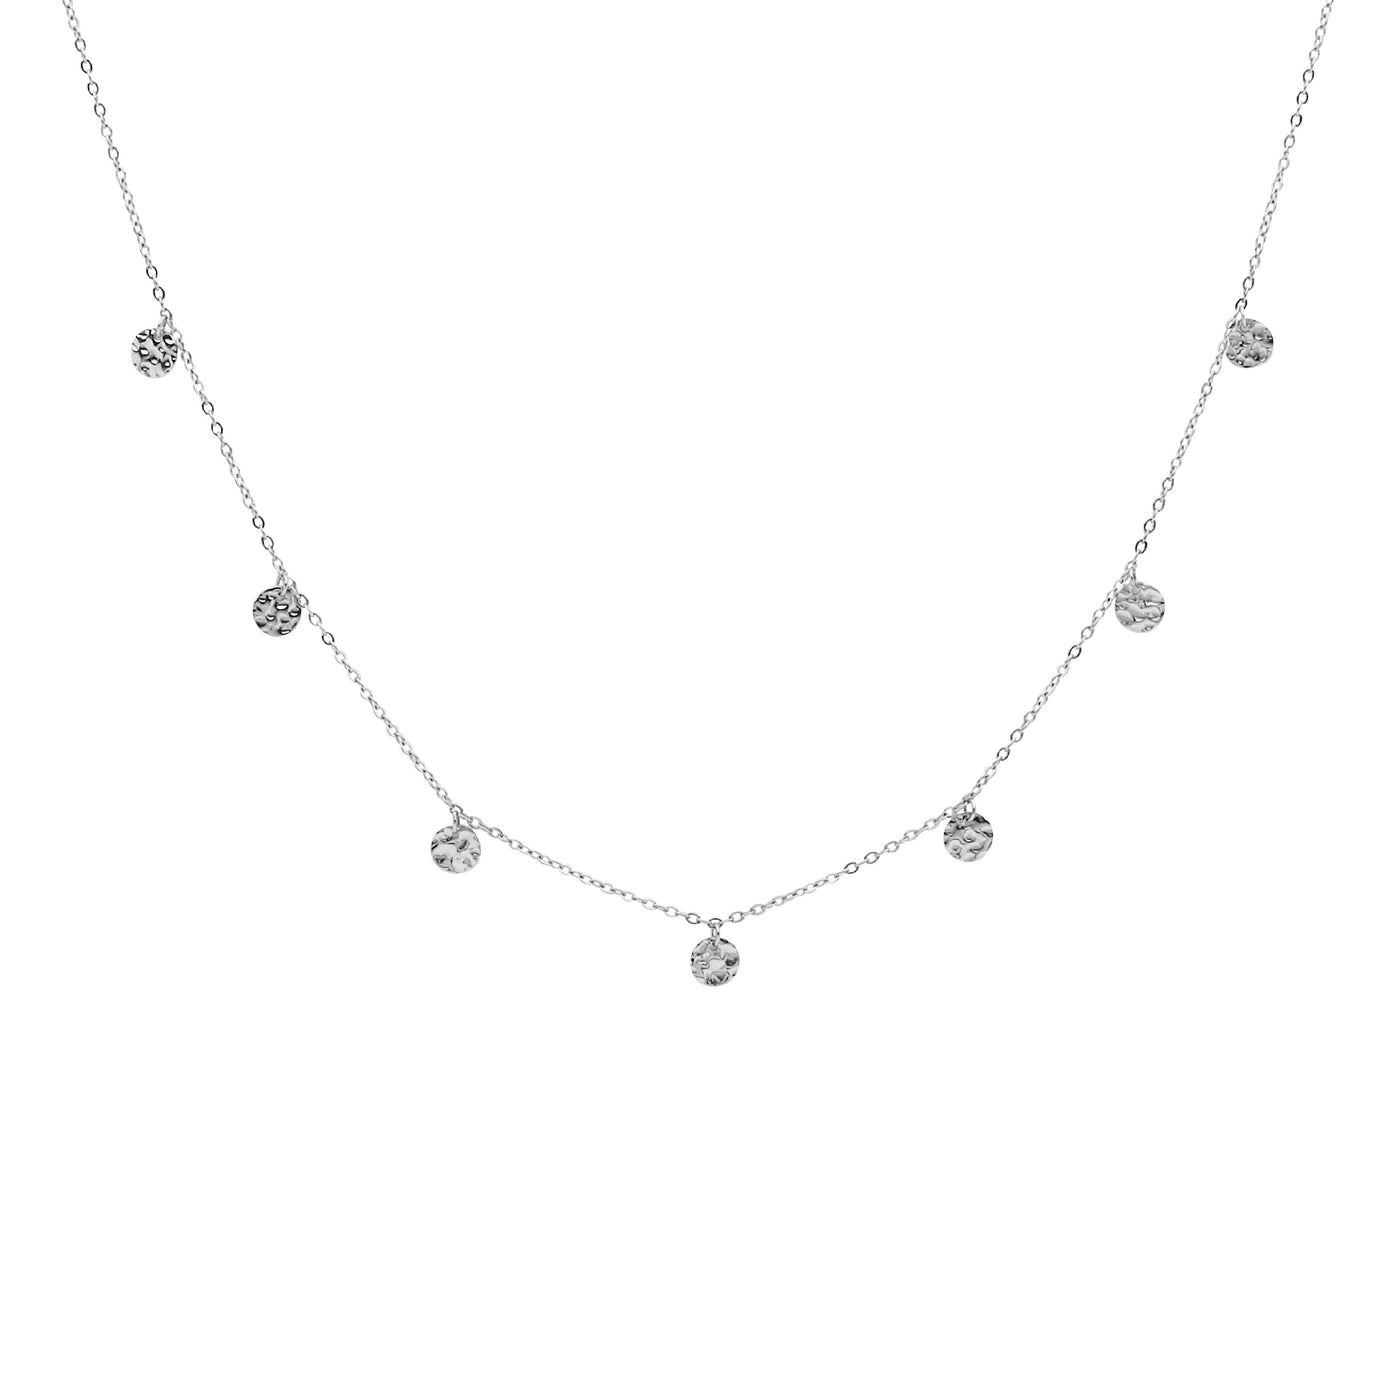 Stainless steel necklace with 7x disk feature